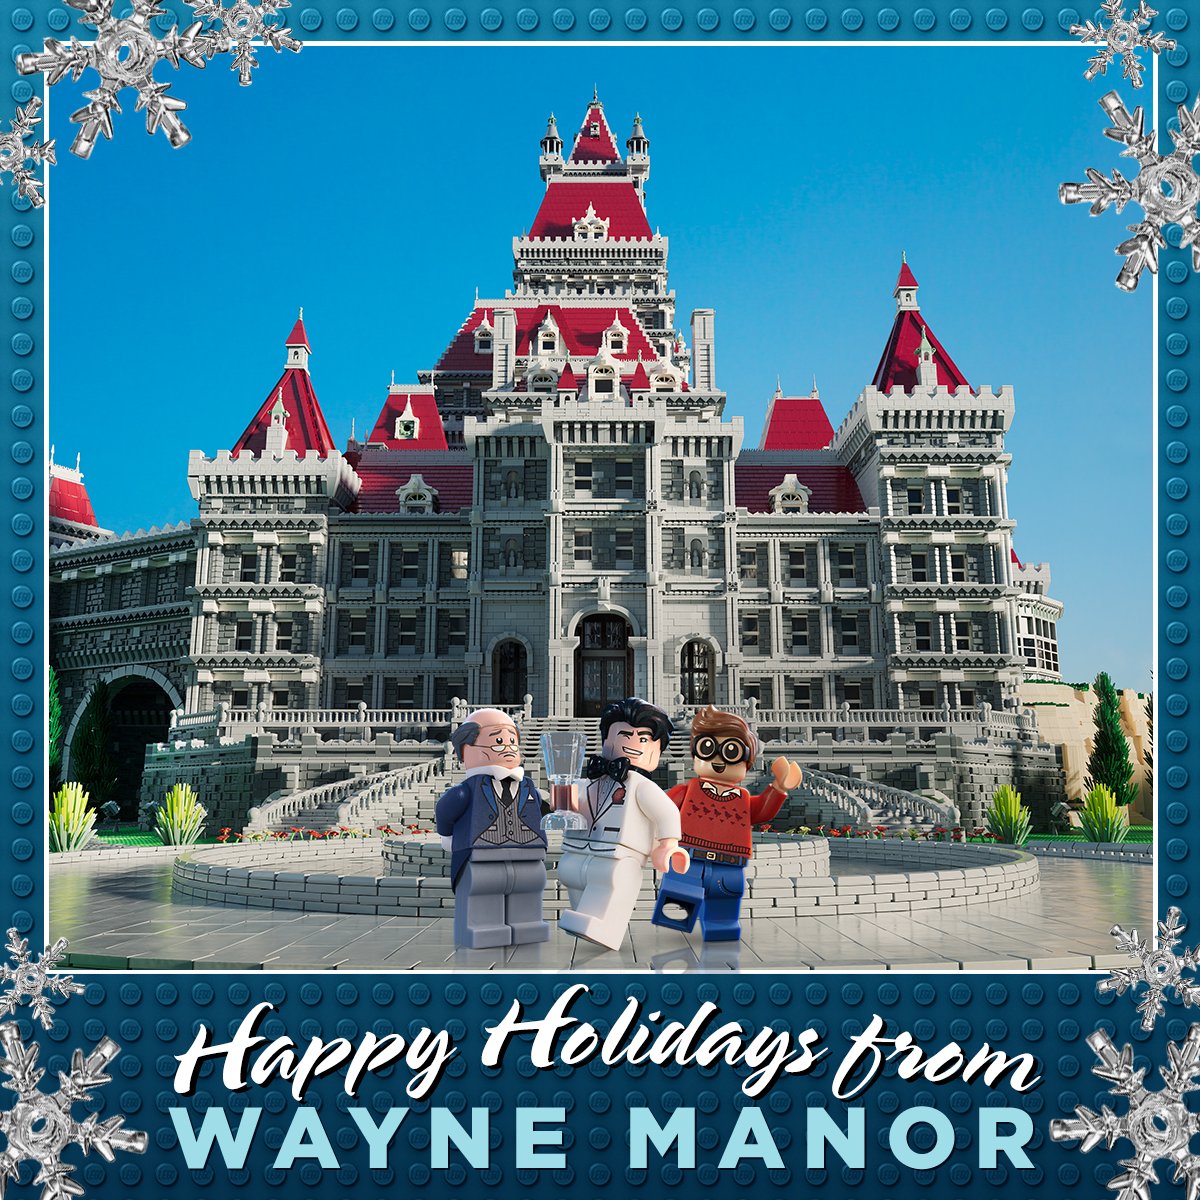 Fern narre gevinst LEGO Batman on Twitter: "Celebrate the holidays with your loved ones, like  your butler and your adopted son. #LEGOBatmanMovie https://t.co/PauLBANB5X"  / Twitter